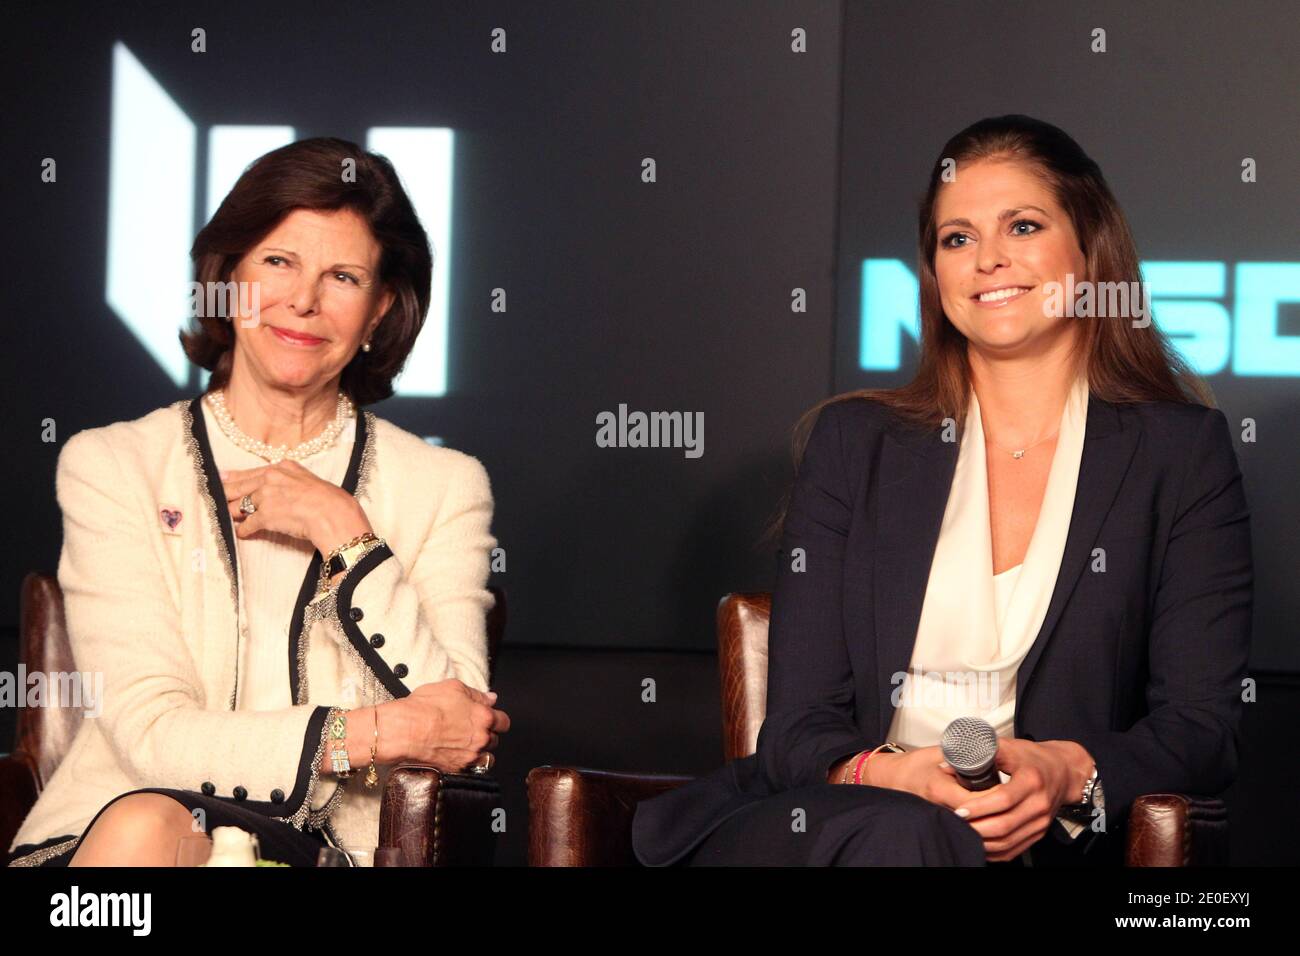 Queen Silvia of Sweden with her daughter Princess Madeleine and actress Geena Davis attending a press conference about the World Childhood Foundation at the Nasdaq building in New York City, NY, USA on May 9, 2012. Photo by Charles Guerin/ABACAPRESS.COM Stock Photo